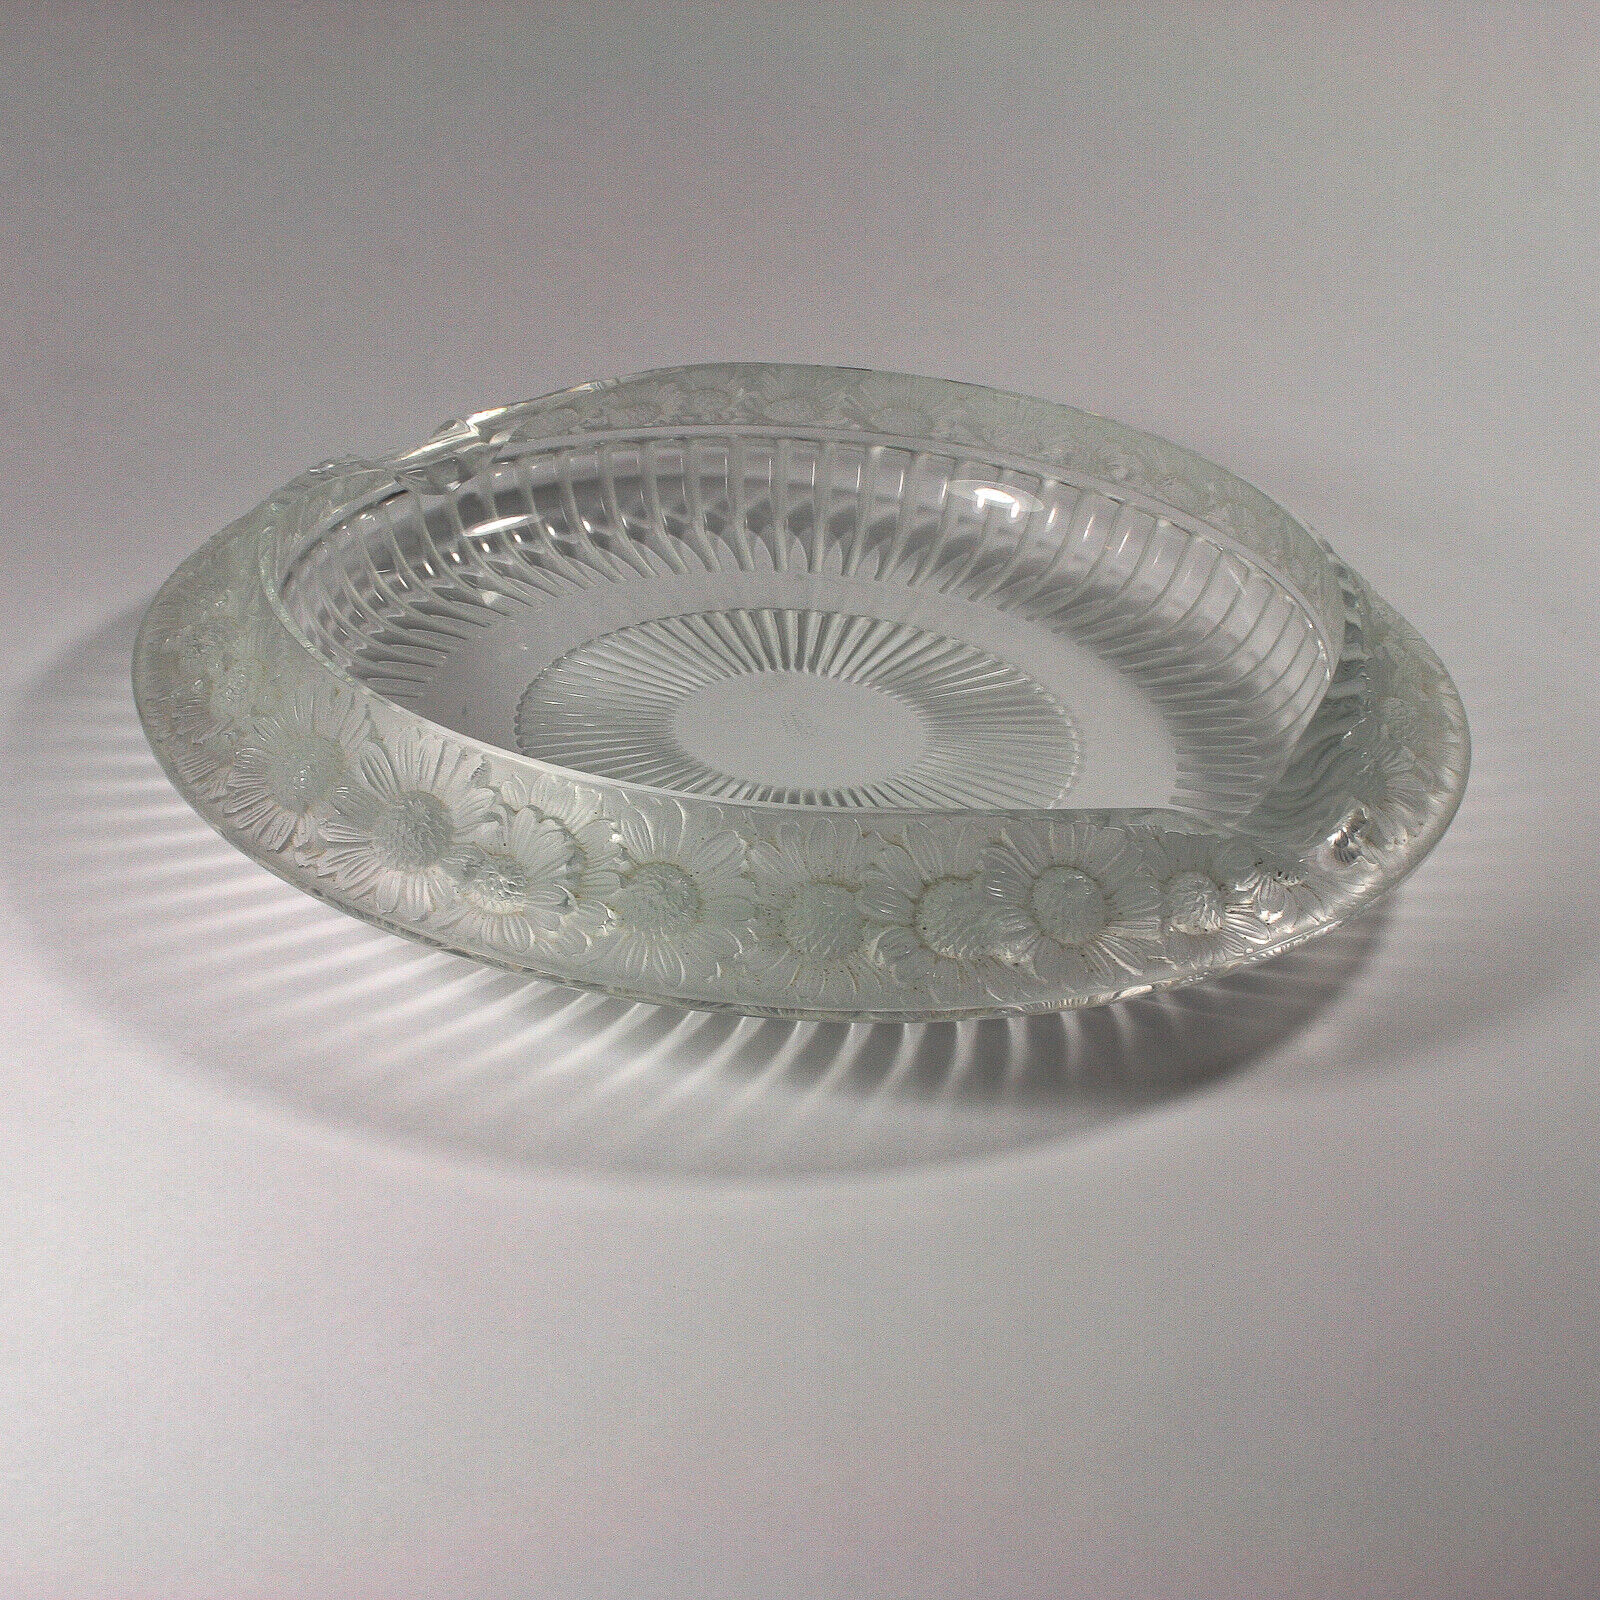 LALIQUE CRYSTAL SUNFLOWER BOWL (MARGUERITE) CLEAR LARGE SIZE 14 INCH